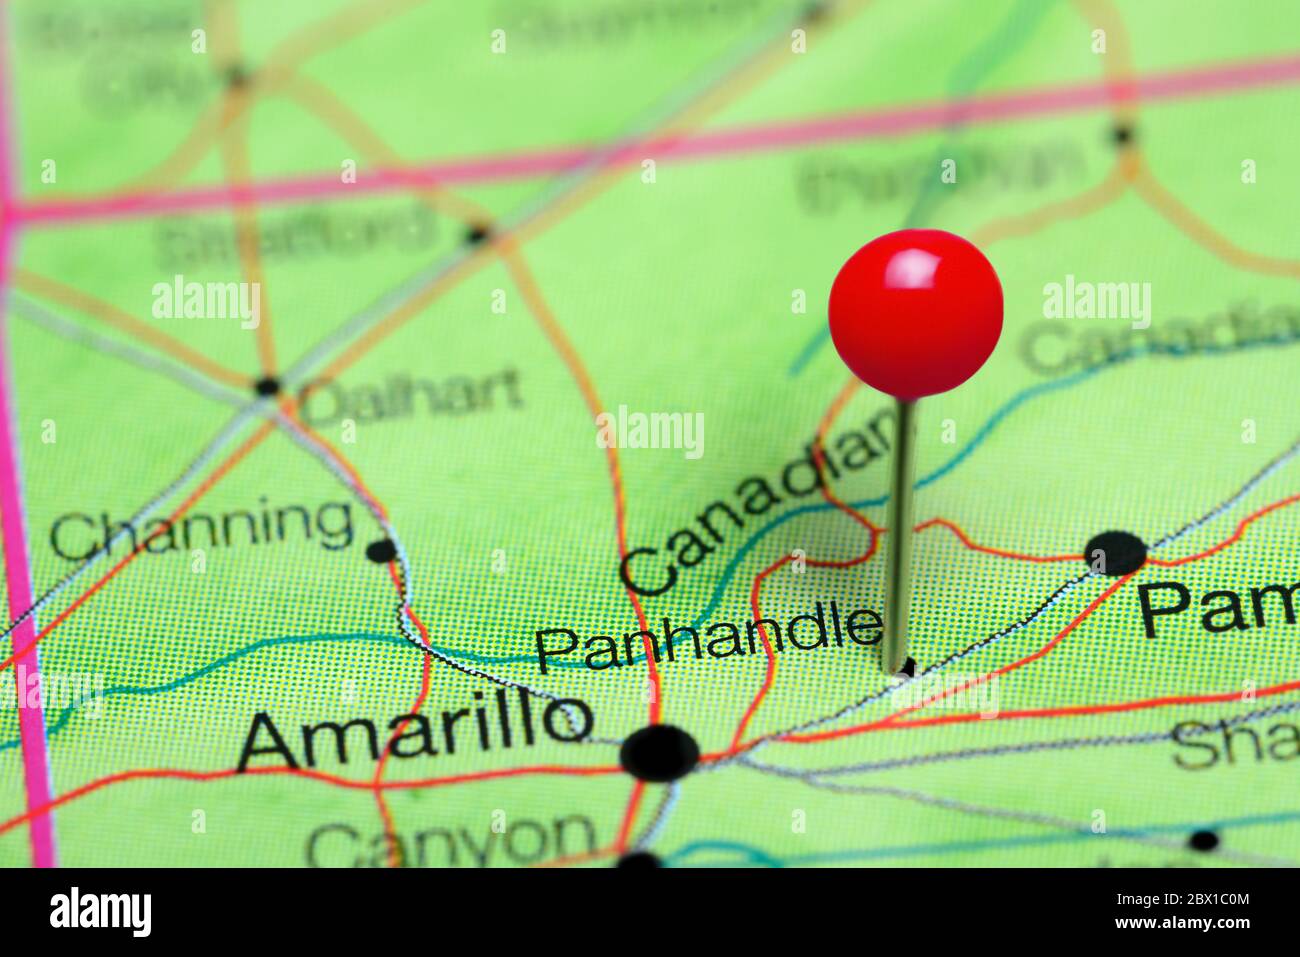 Panhandle pinned on a map of Texas, USA Stock Photo